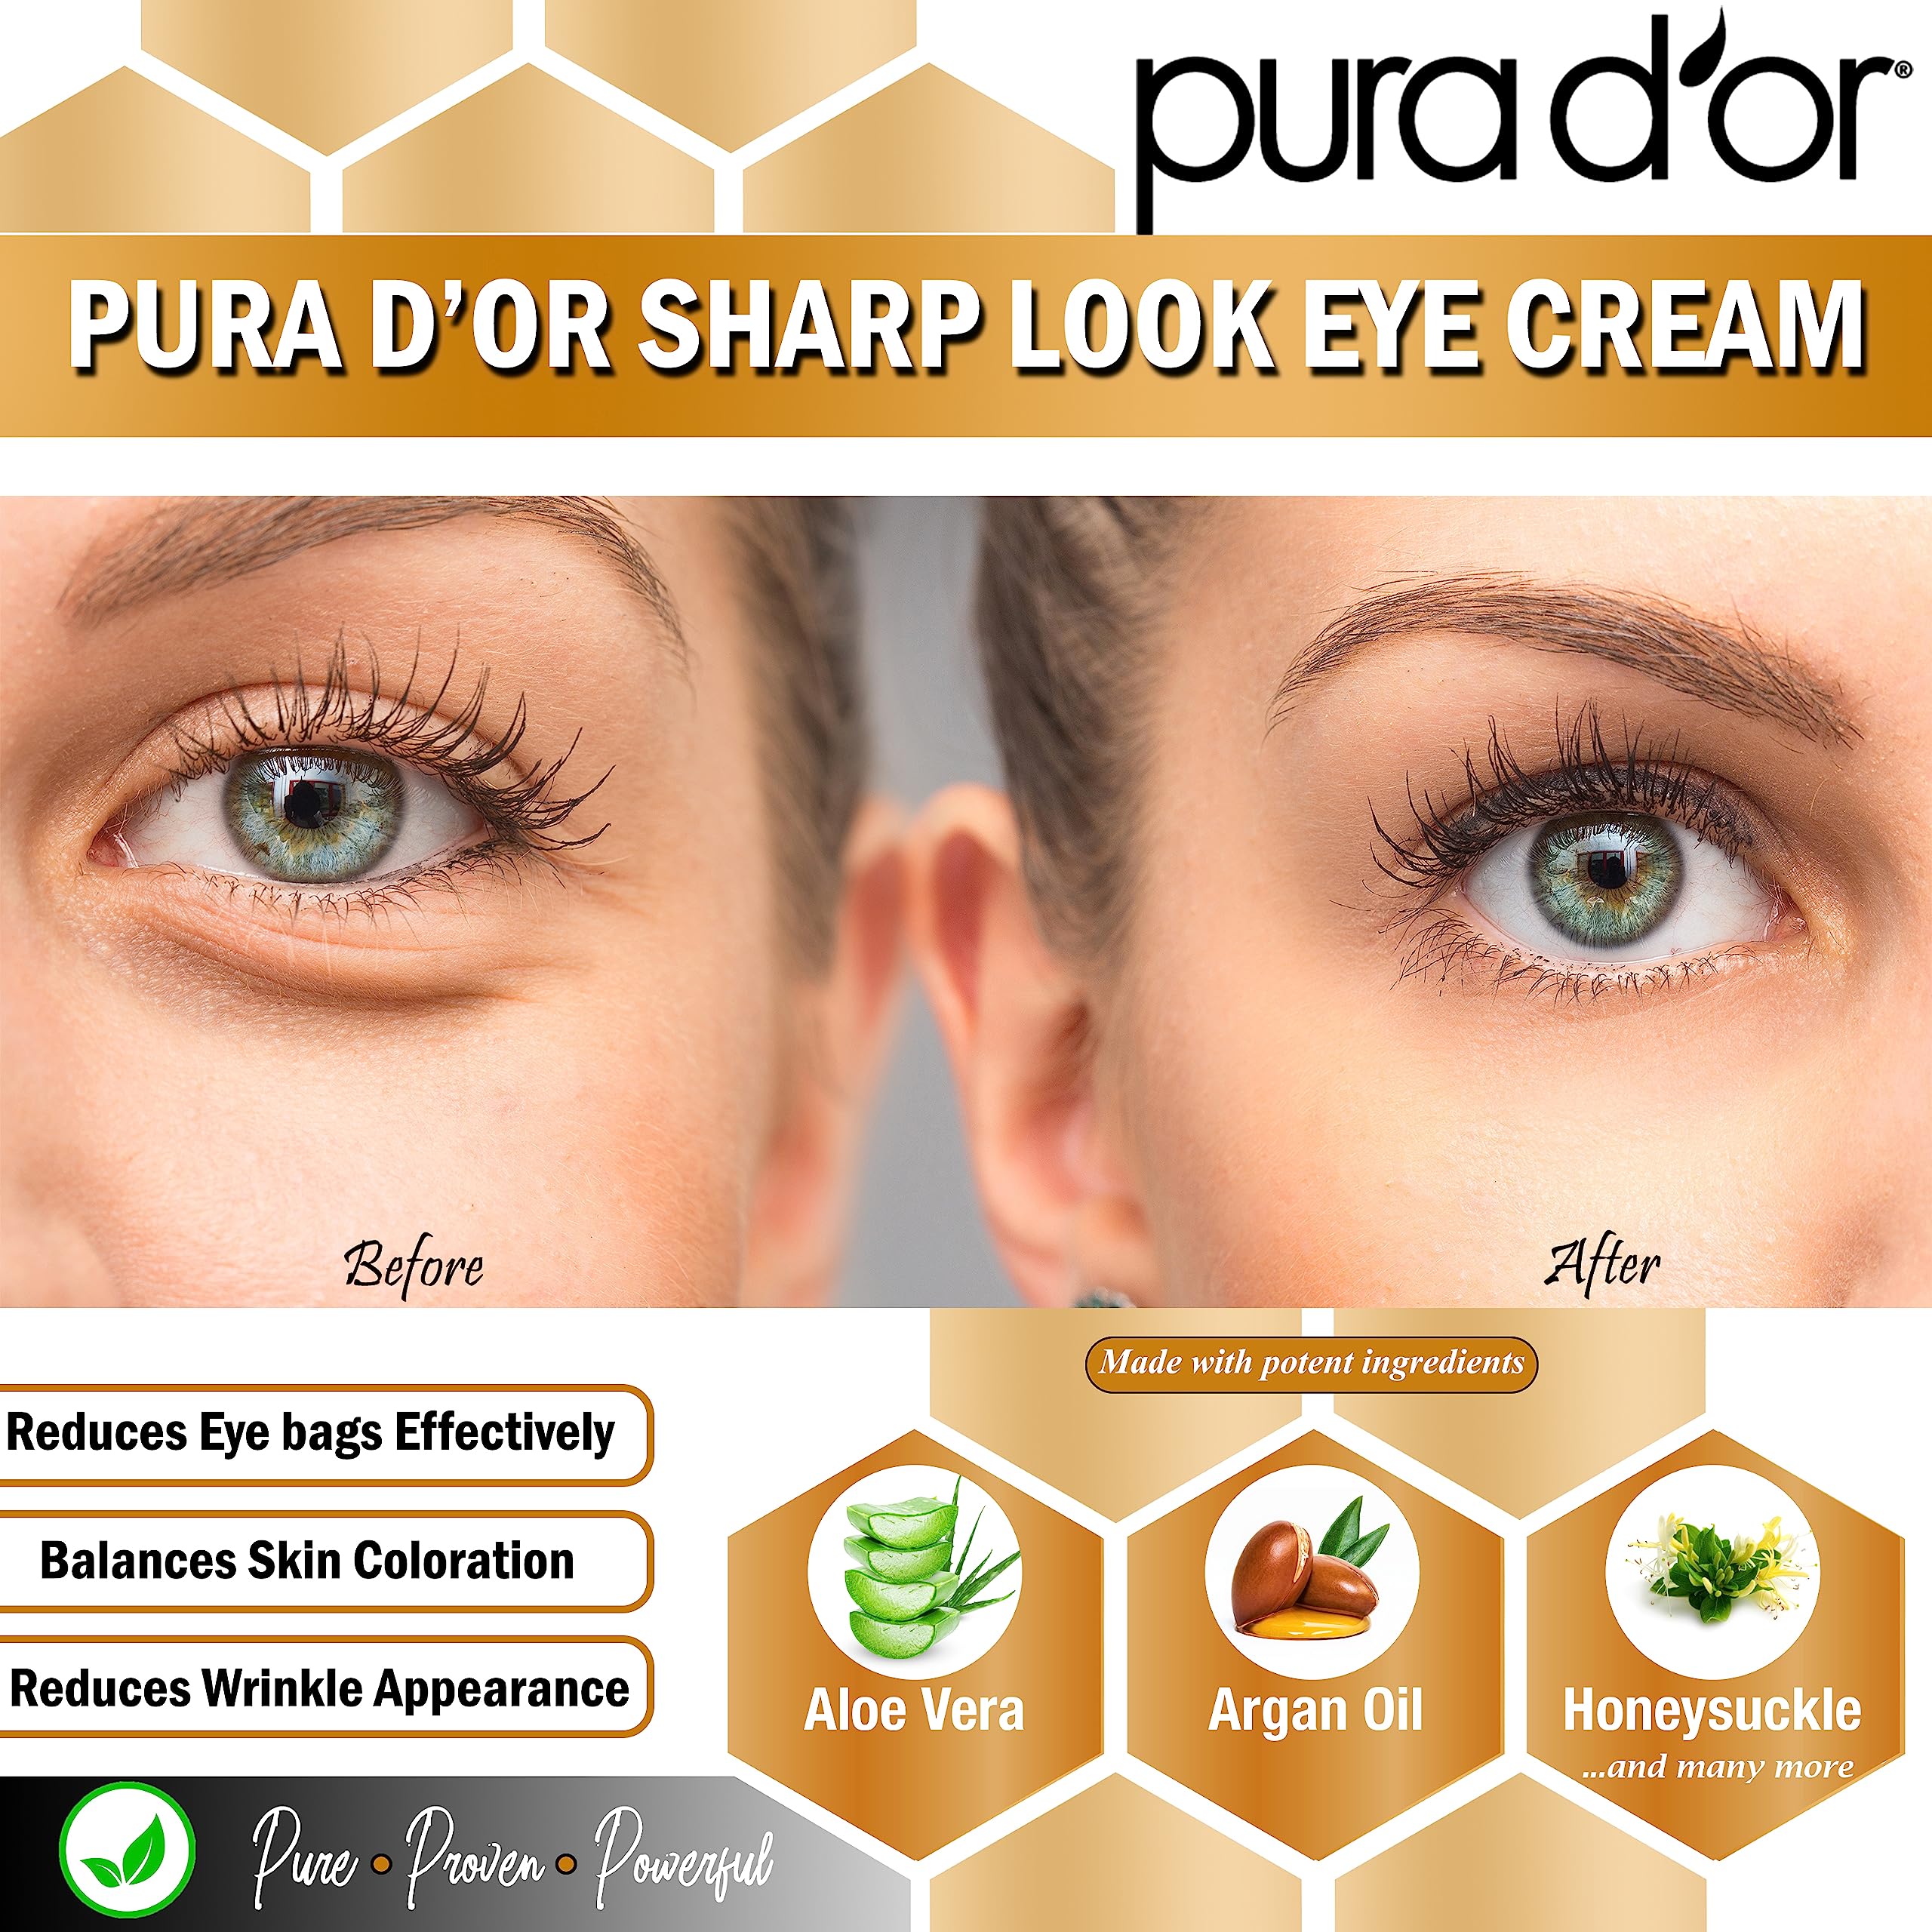 PURA D'OR Sharp Look Eye Cream (1.7oz) Youth-Enhancing Eye Cream For Firm Lift and Reduced Appearance of Wrinkles and Fine Lines, Puffiness and Under Eye Bags With 24K Gold